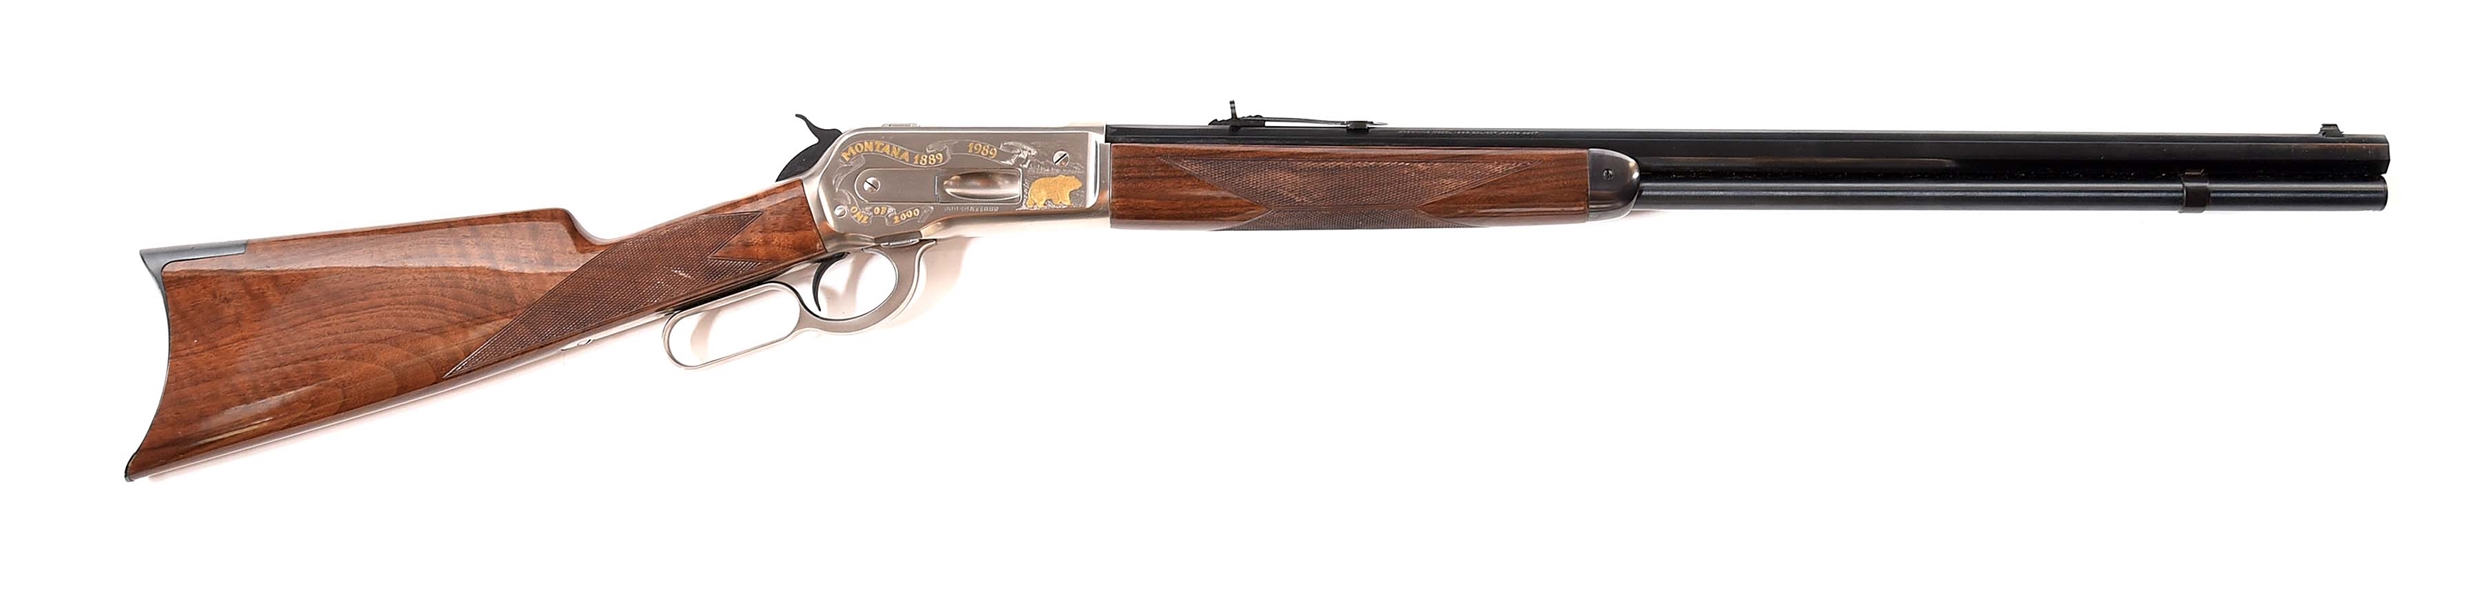 (M) BROWNING MODEL 1886 .45-70 "MONTANA CENTENNIAL" LEVER ACTION RIFLE.